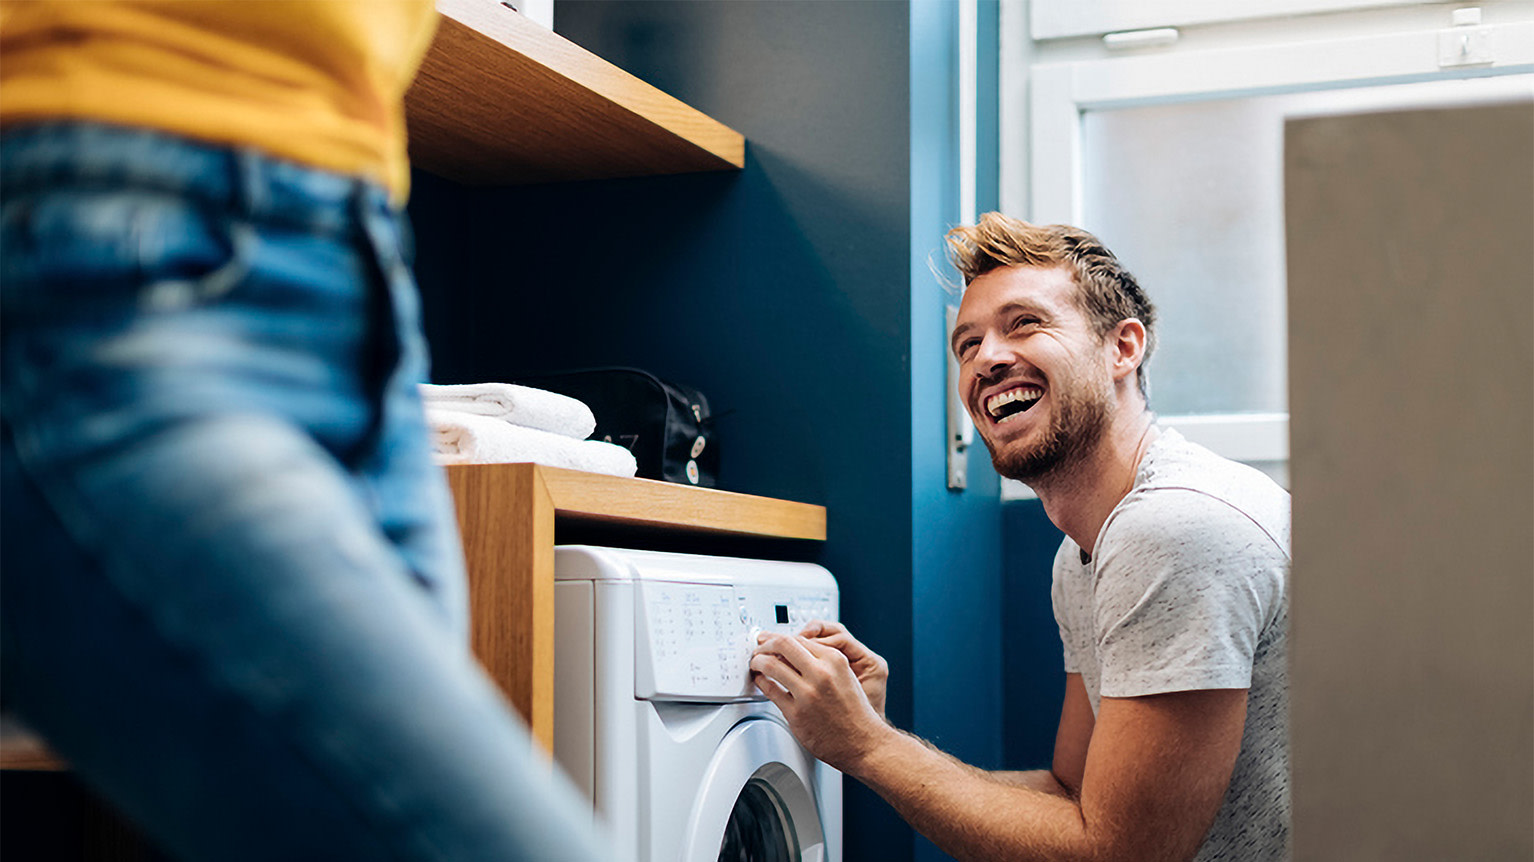 The Ultimate Guide To Washing Your Clothes